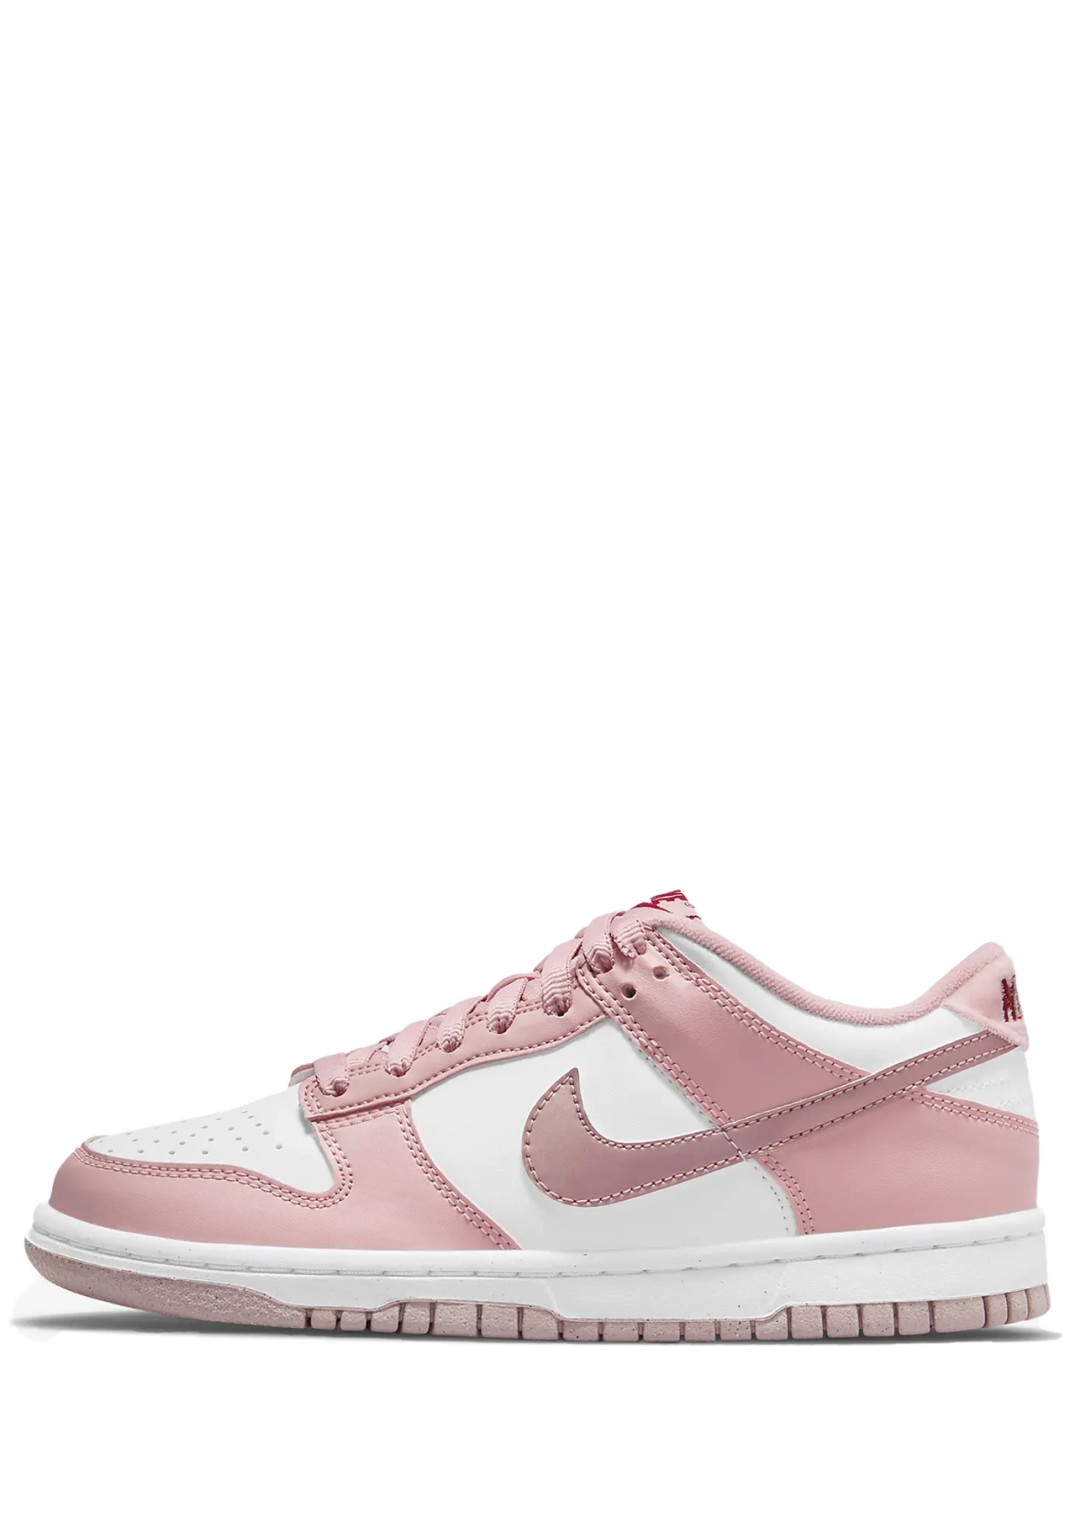 Nike - Dunk Low - Donna - DO6485 600